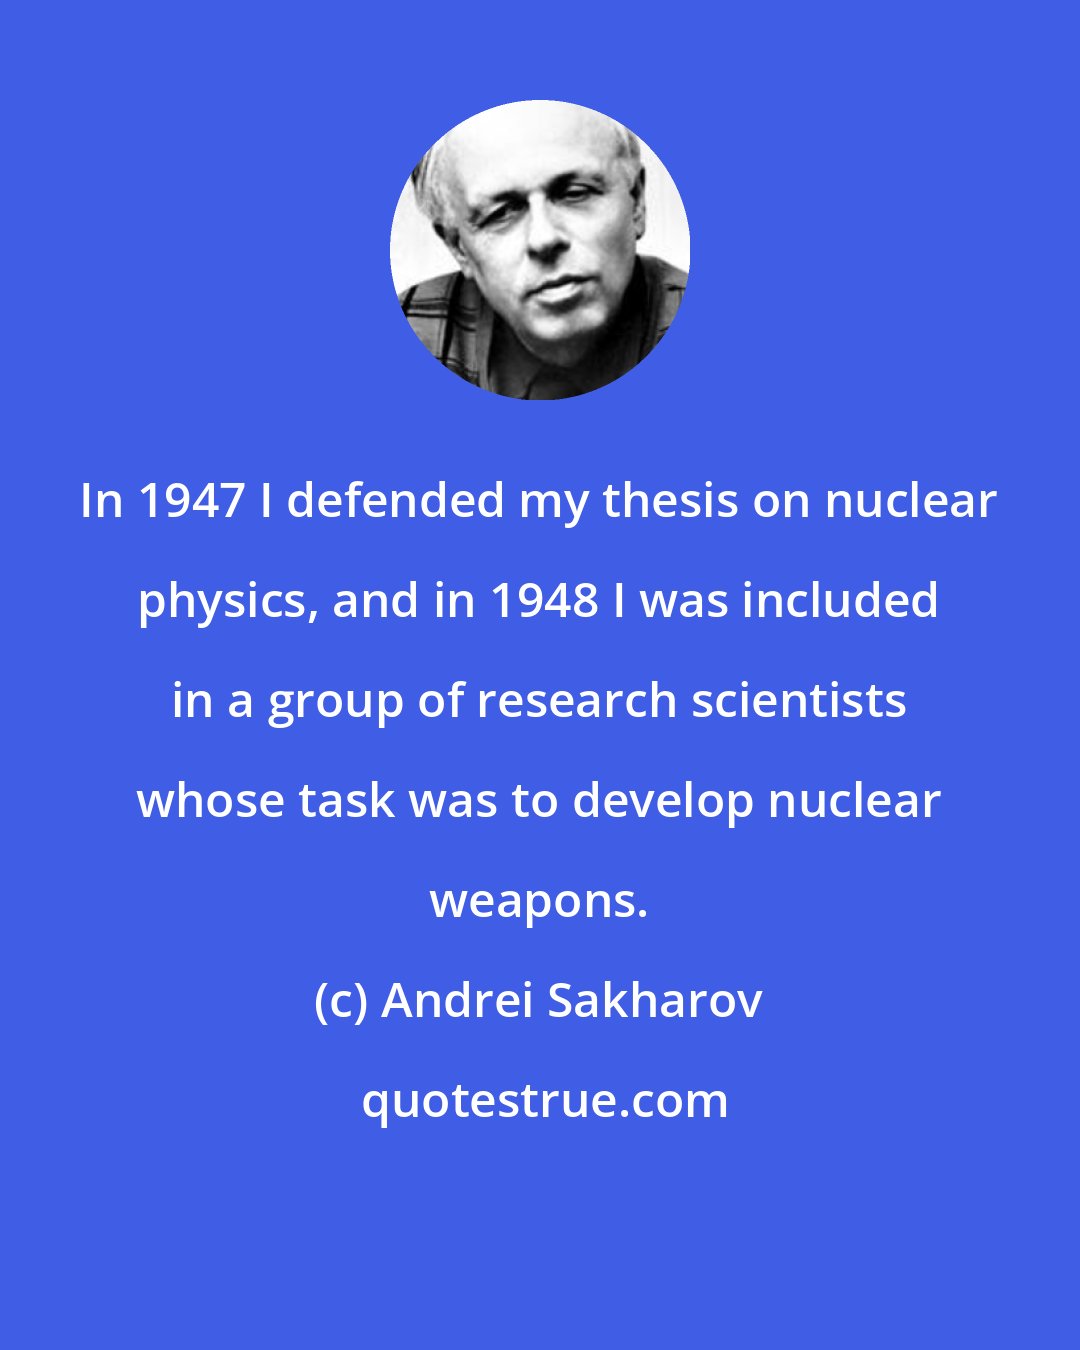 Andrei Sakharov: In 1947 I defended my thesis on nuclear physics, and in 1948 I was included in a group of research scientists whose task was to develop nuclear weapons.